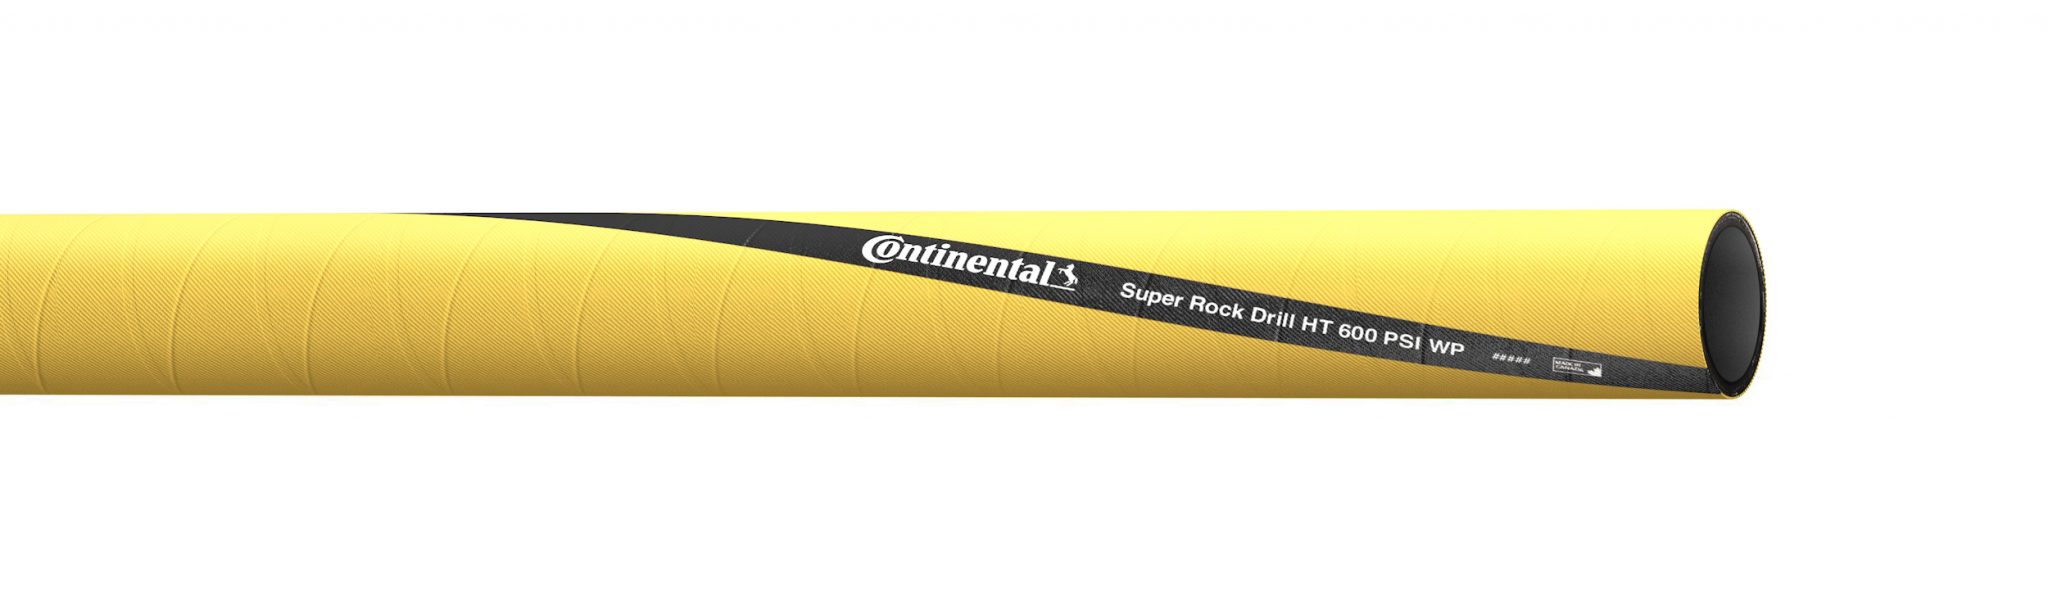 Continental Introduces New Heavy-Duty Air Hose To Construction and Mining Markets